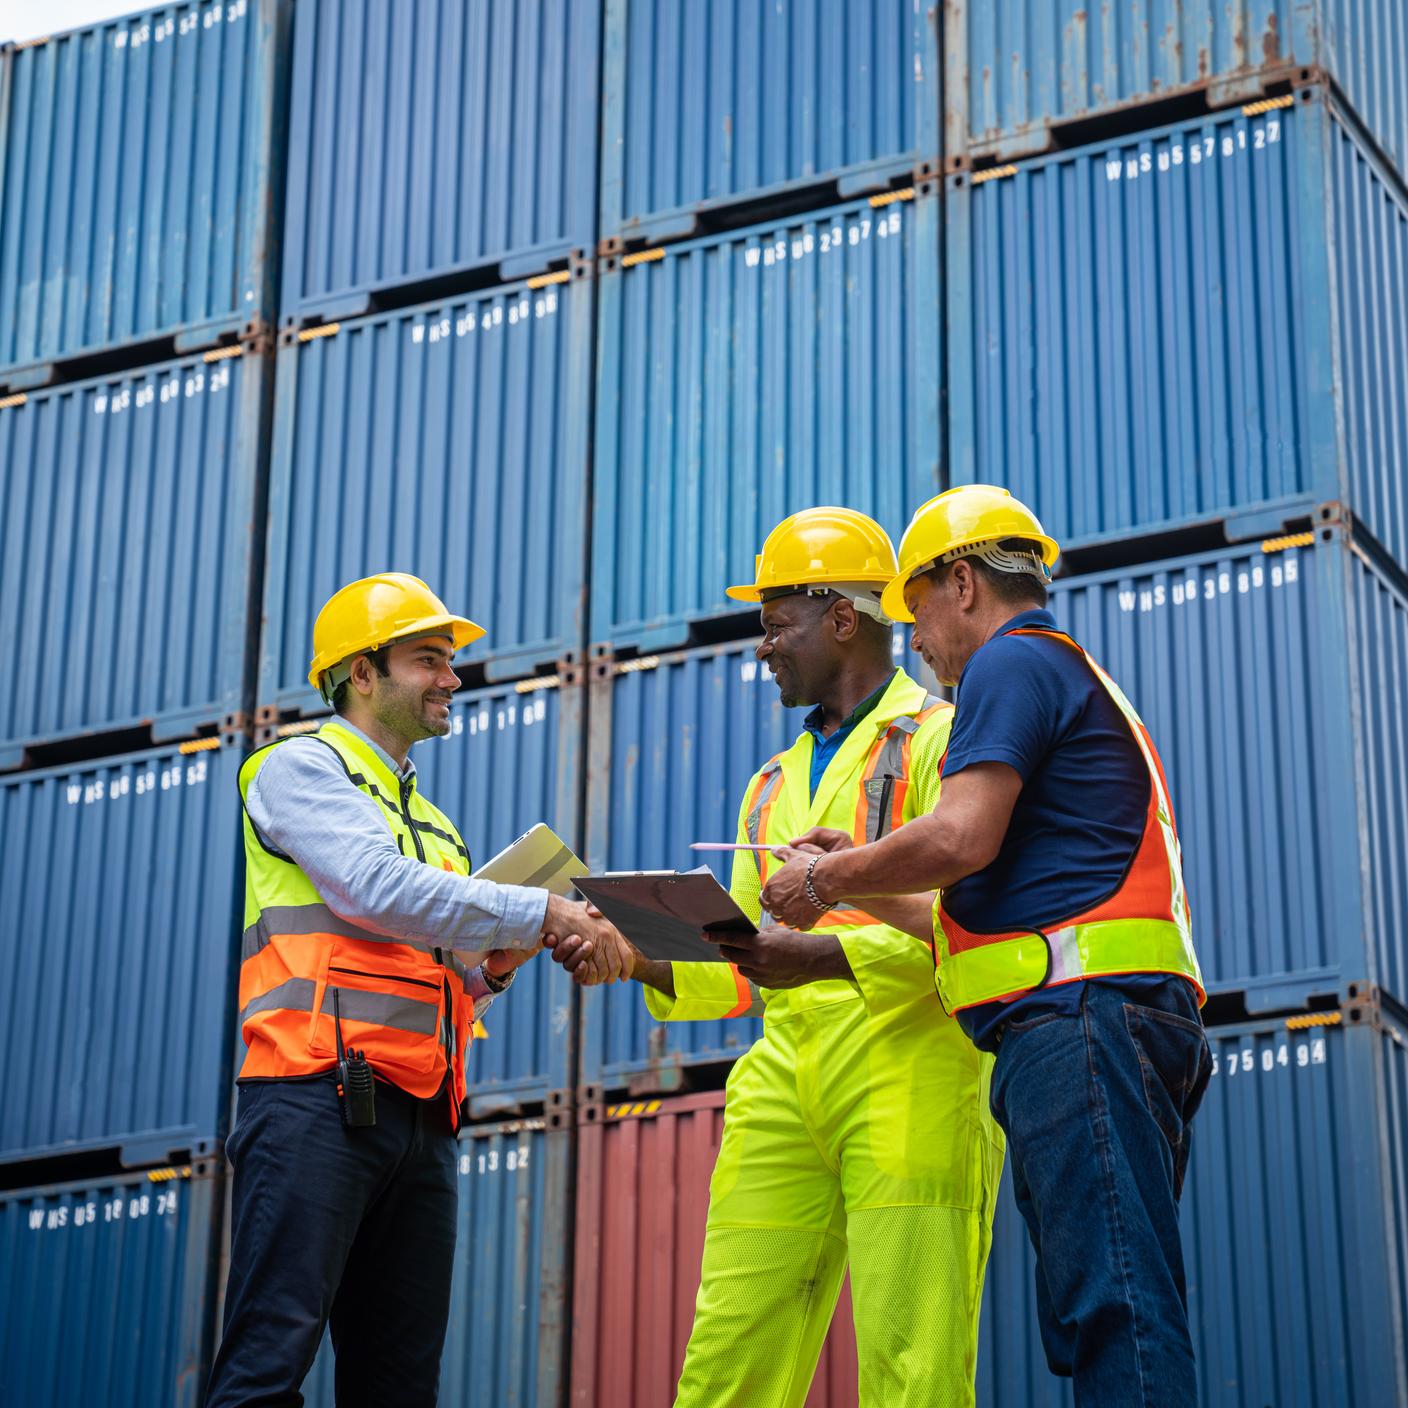 Engineer and foreman control checking containers at container yard